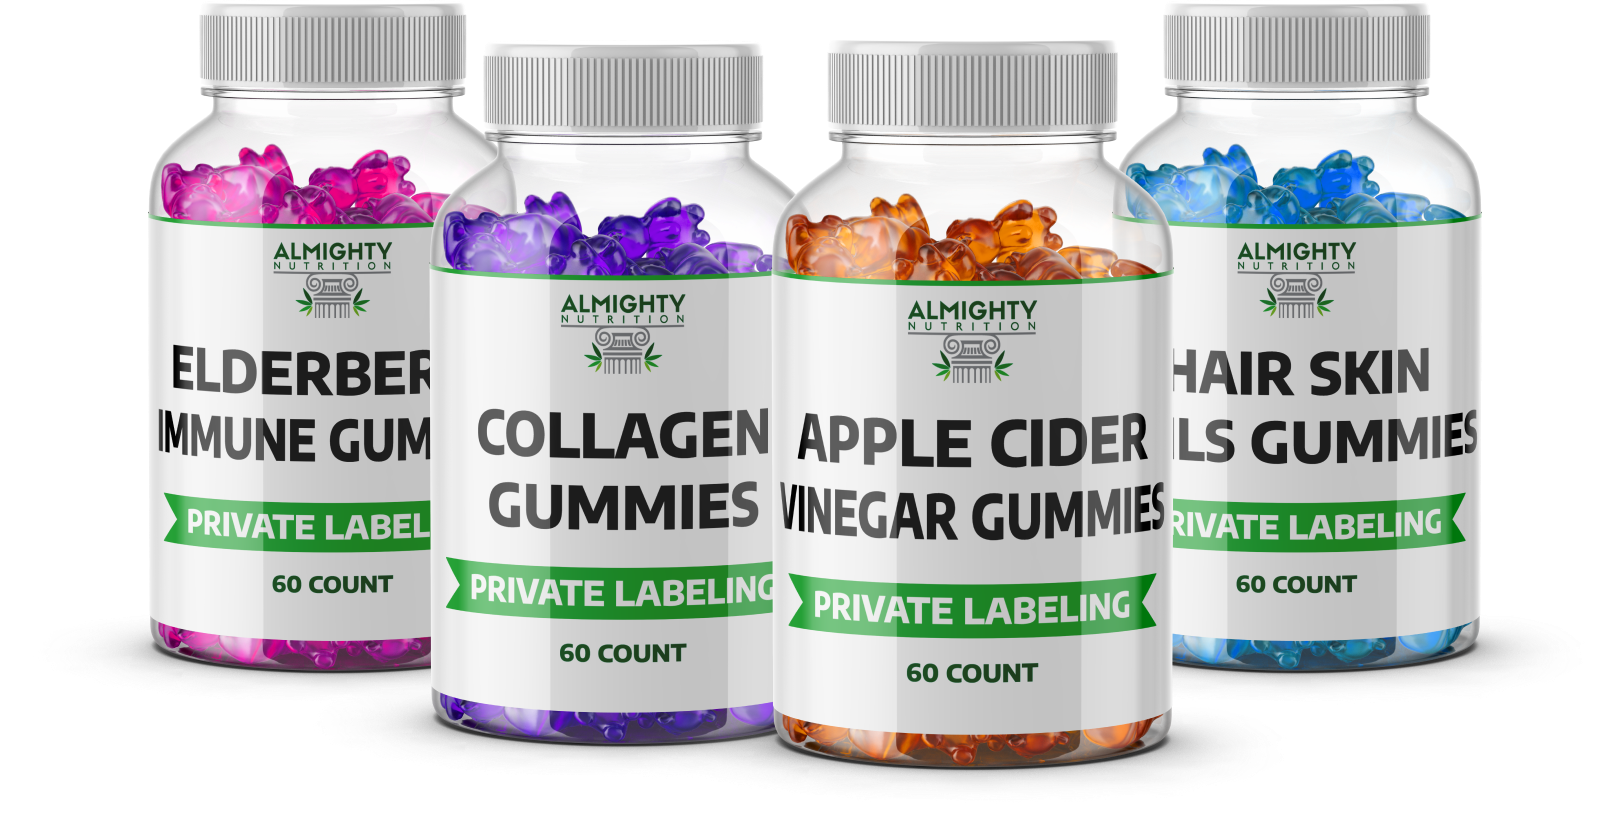 Examples of Custom Gummy Packaging available from Almighty Nutrition